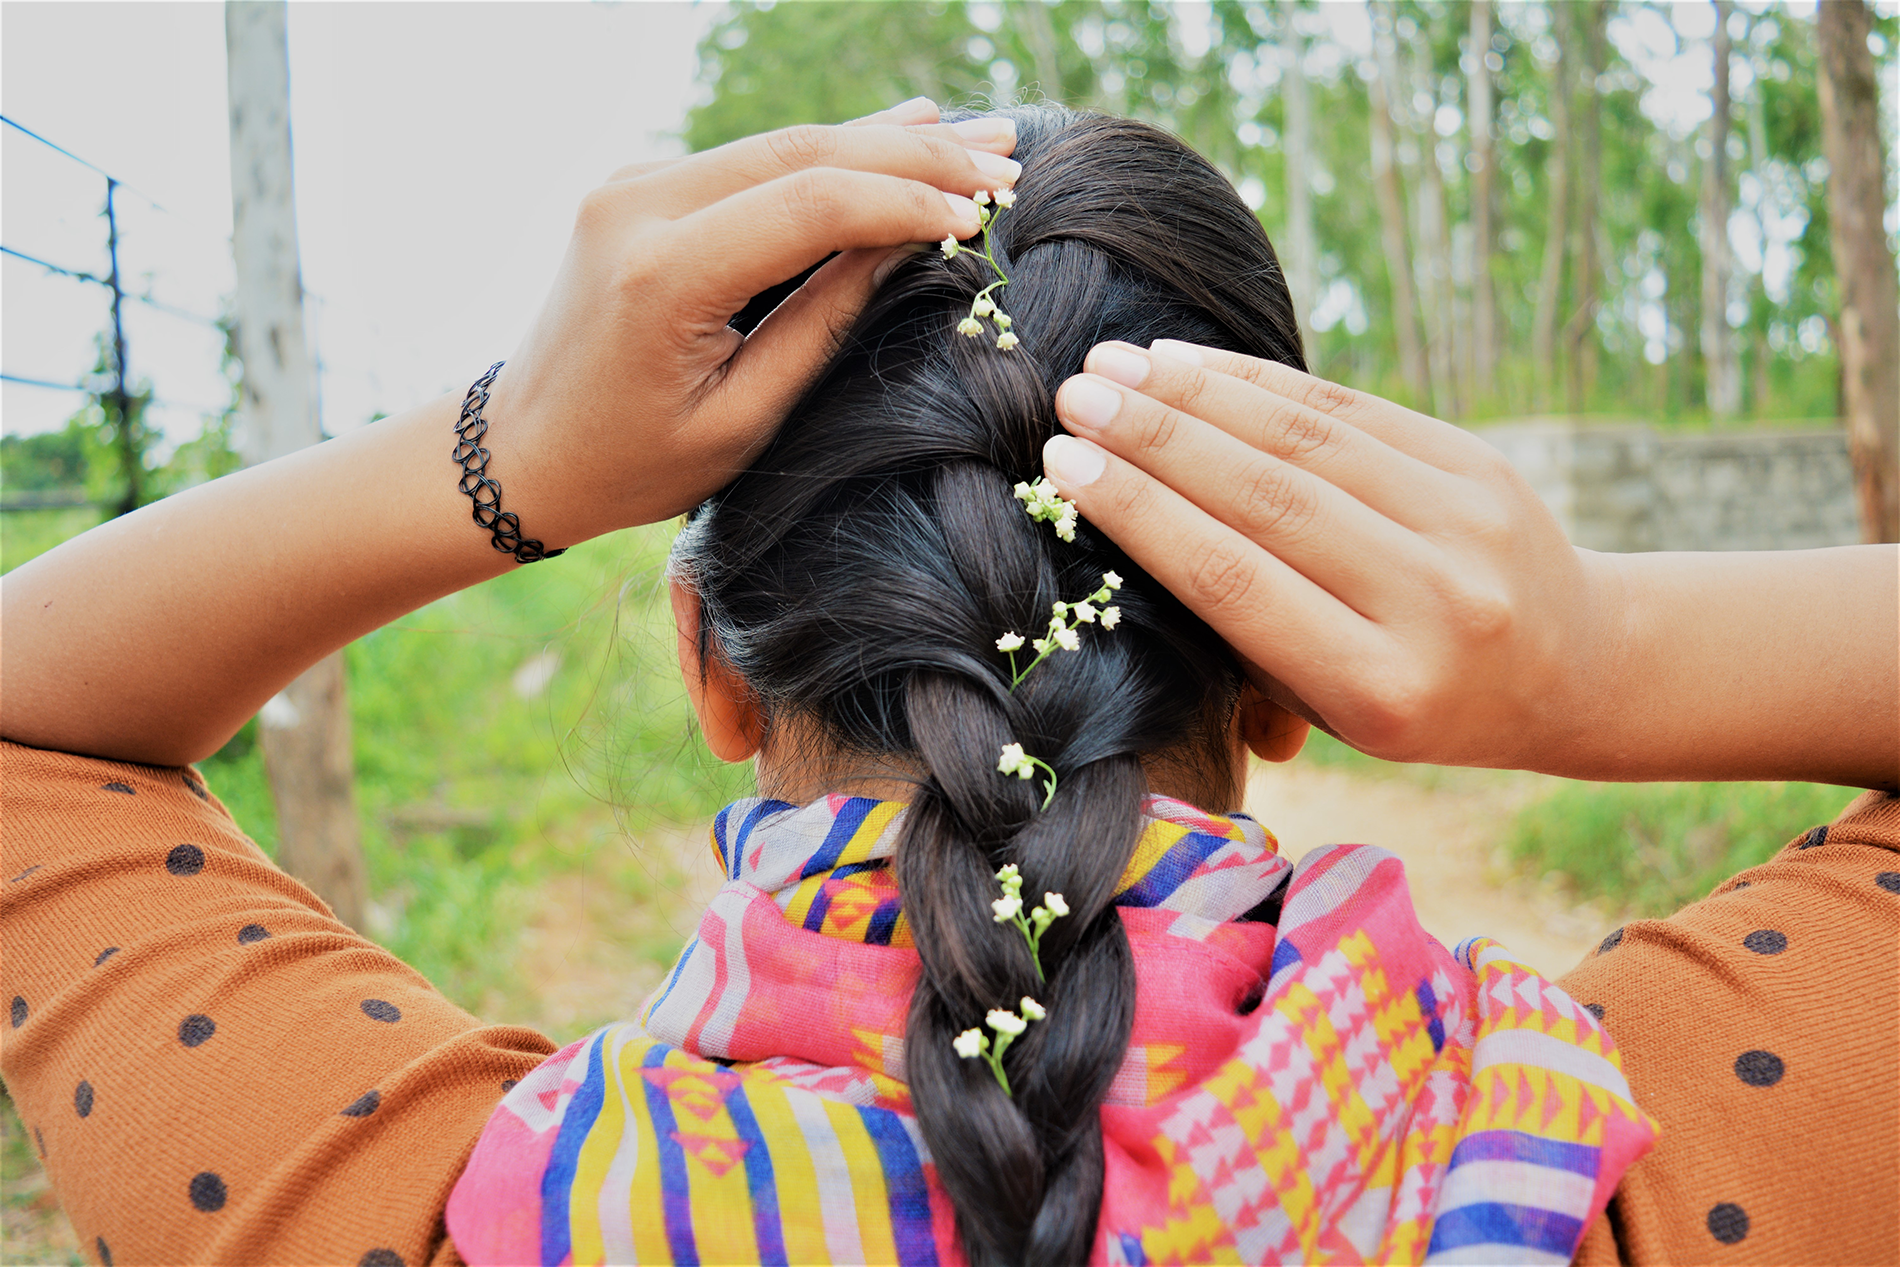 Woman seen from the back with tiny flowers woven into her long braid